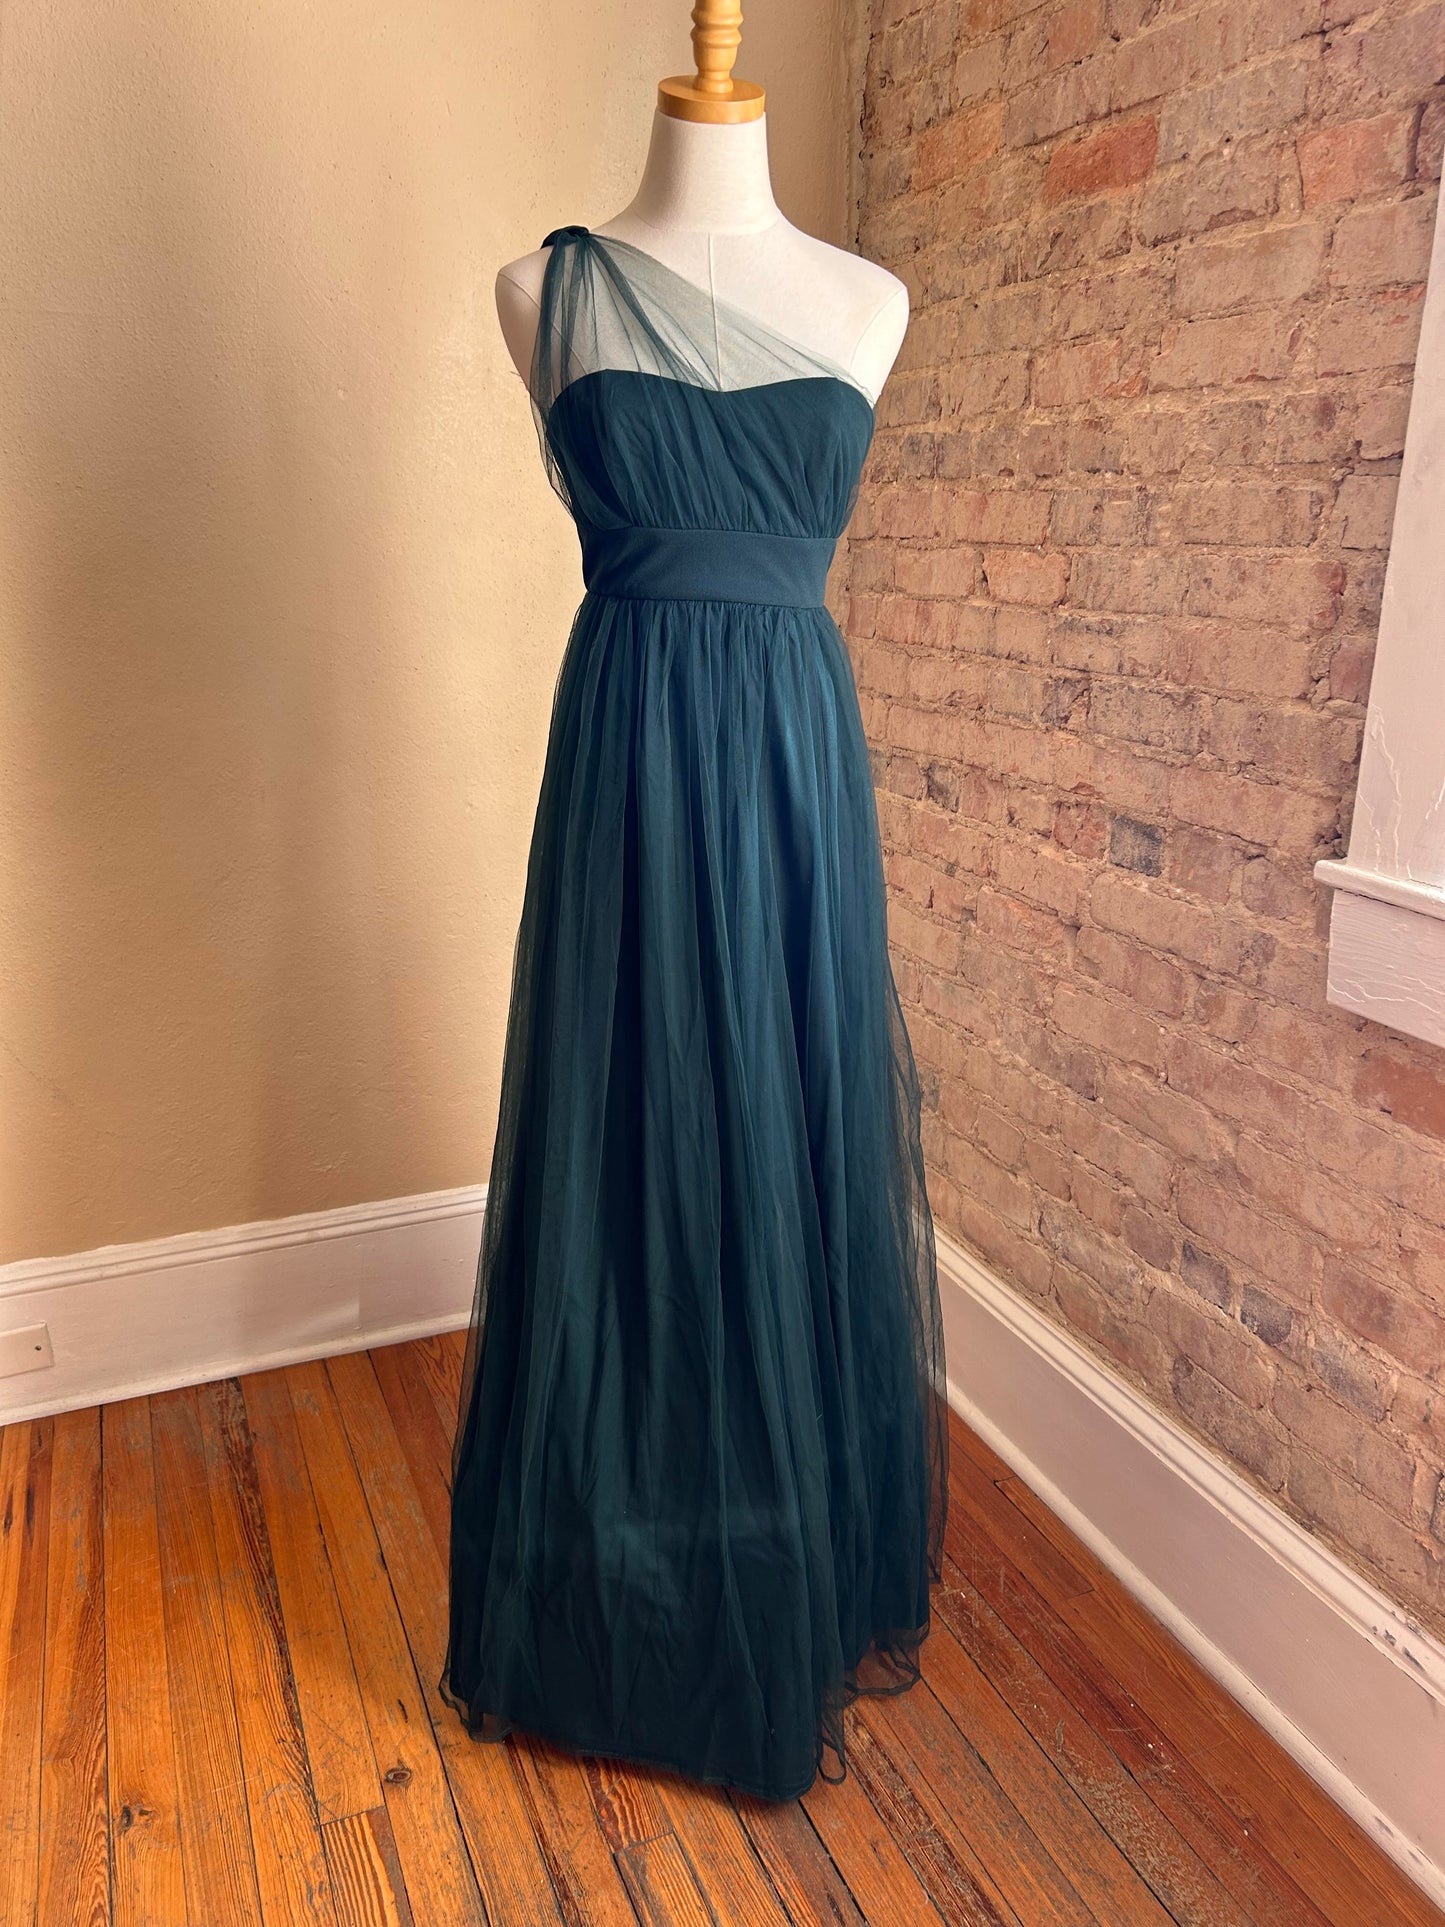 Emerald Green Tulle Dress Rental - Size Small